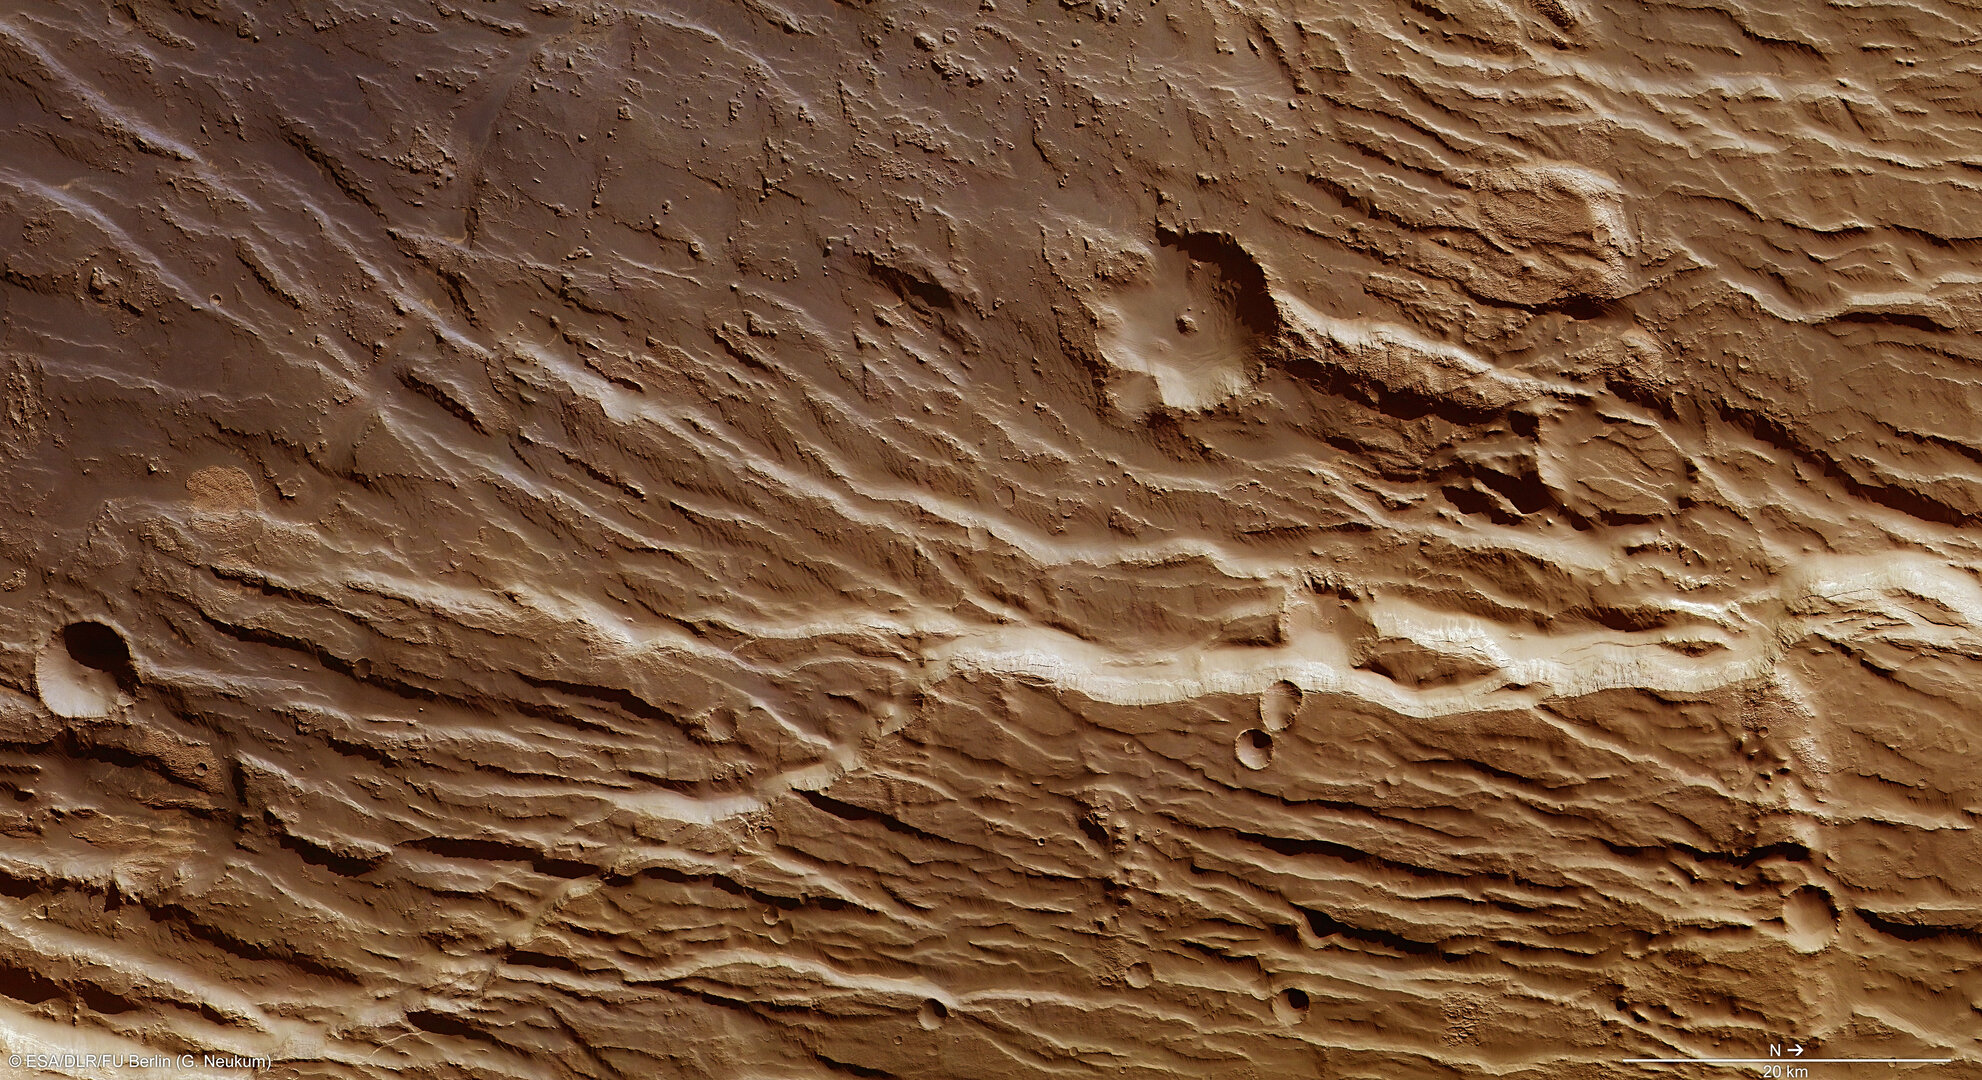 Chasms and cliffs on Mars 